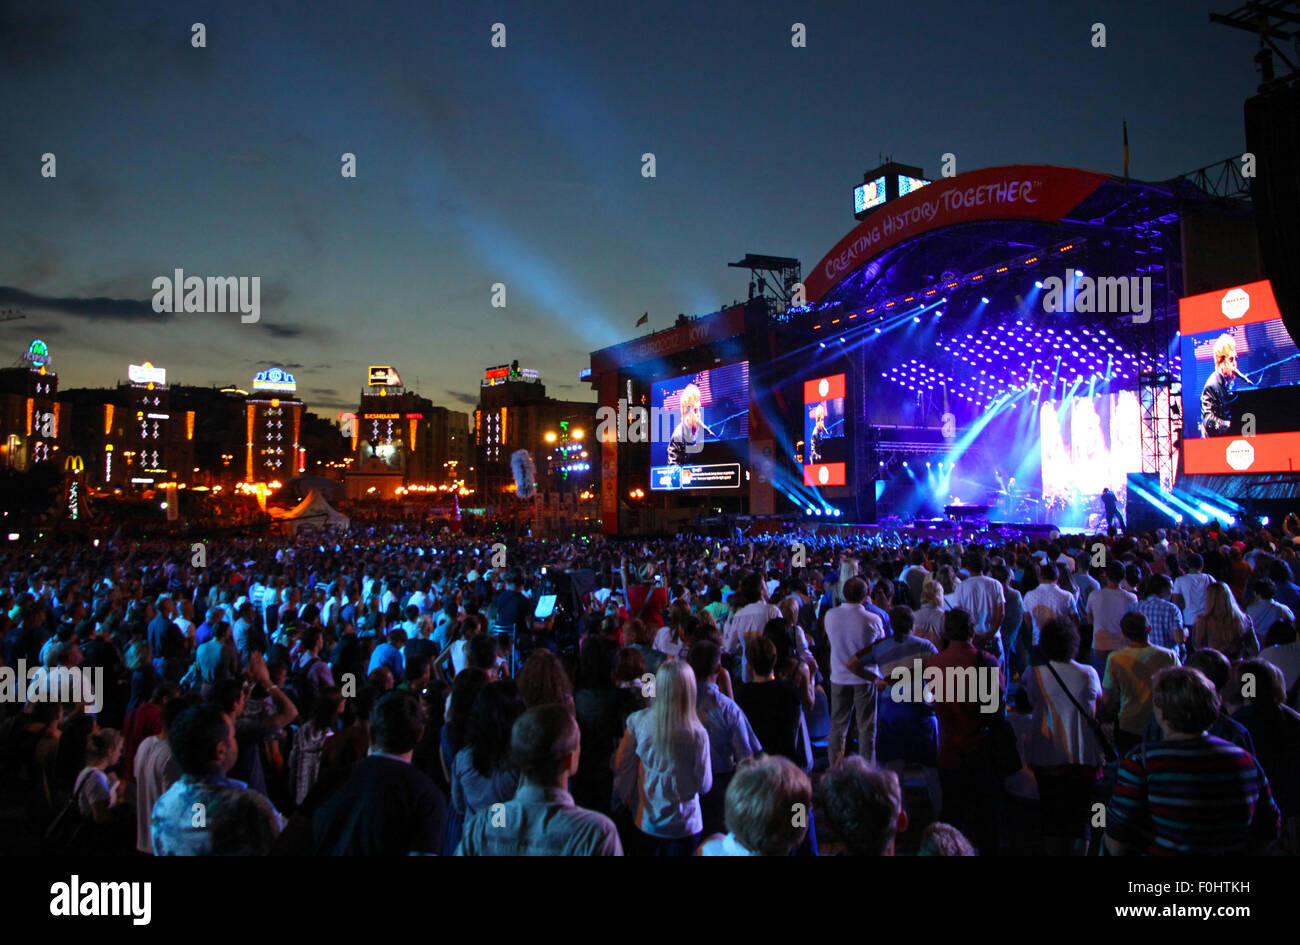 KYIV, UKRAINE - JUNE 30, 2012: People look on Sir Elton John performs onstage during charity Anti-AIDS concert at the Independence Square on June 30, 2012 in Kyiv, Ukraine Stock Photo